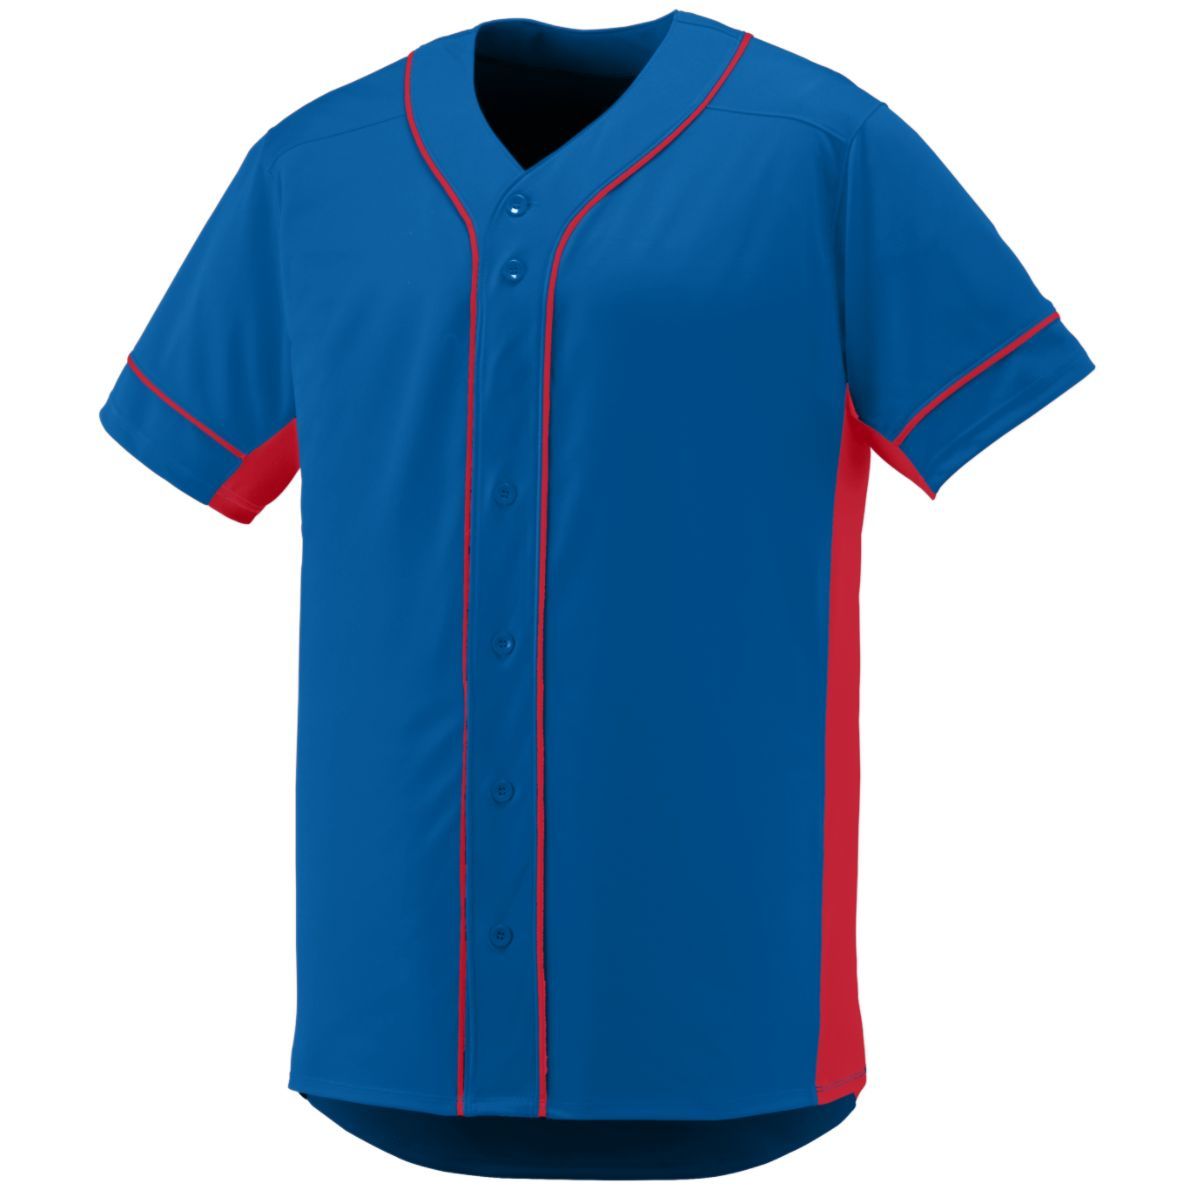 Augusta Sportswear Slugger Jersey in Royal/Red  -Part of the Adult, Adult-Jersey, Augusta-Products, Baseball, Shirts, All-Sports, All-Sports-1 product lines at KanaleyCreations.com